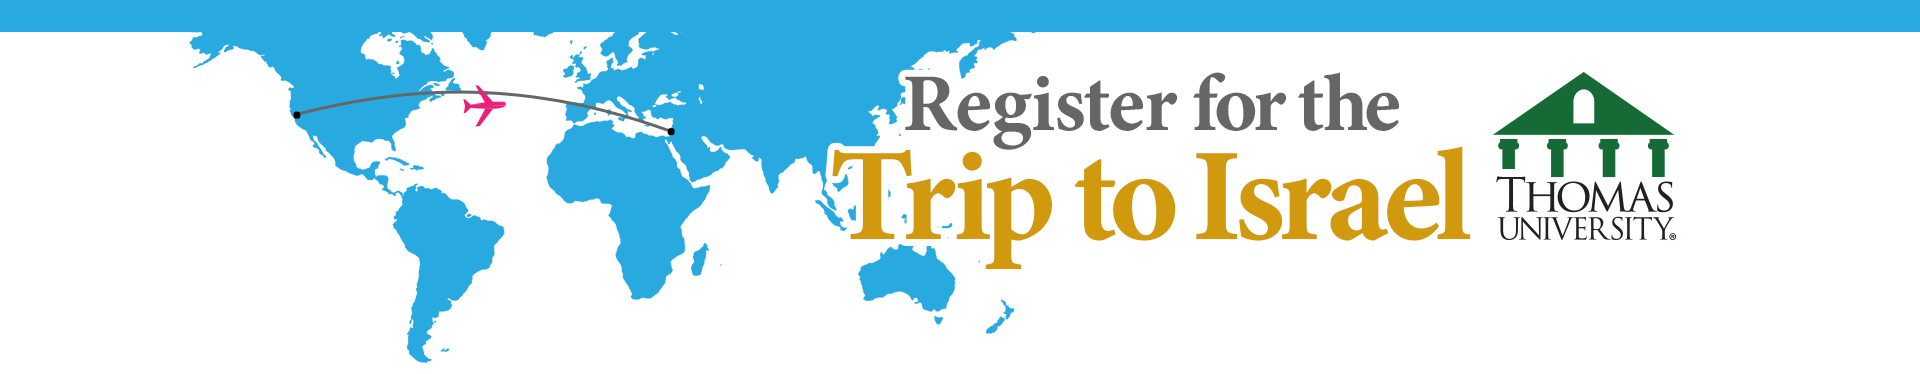 Register for the Trip to Israel